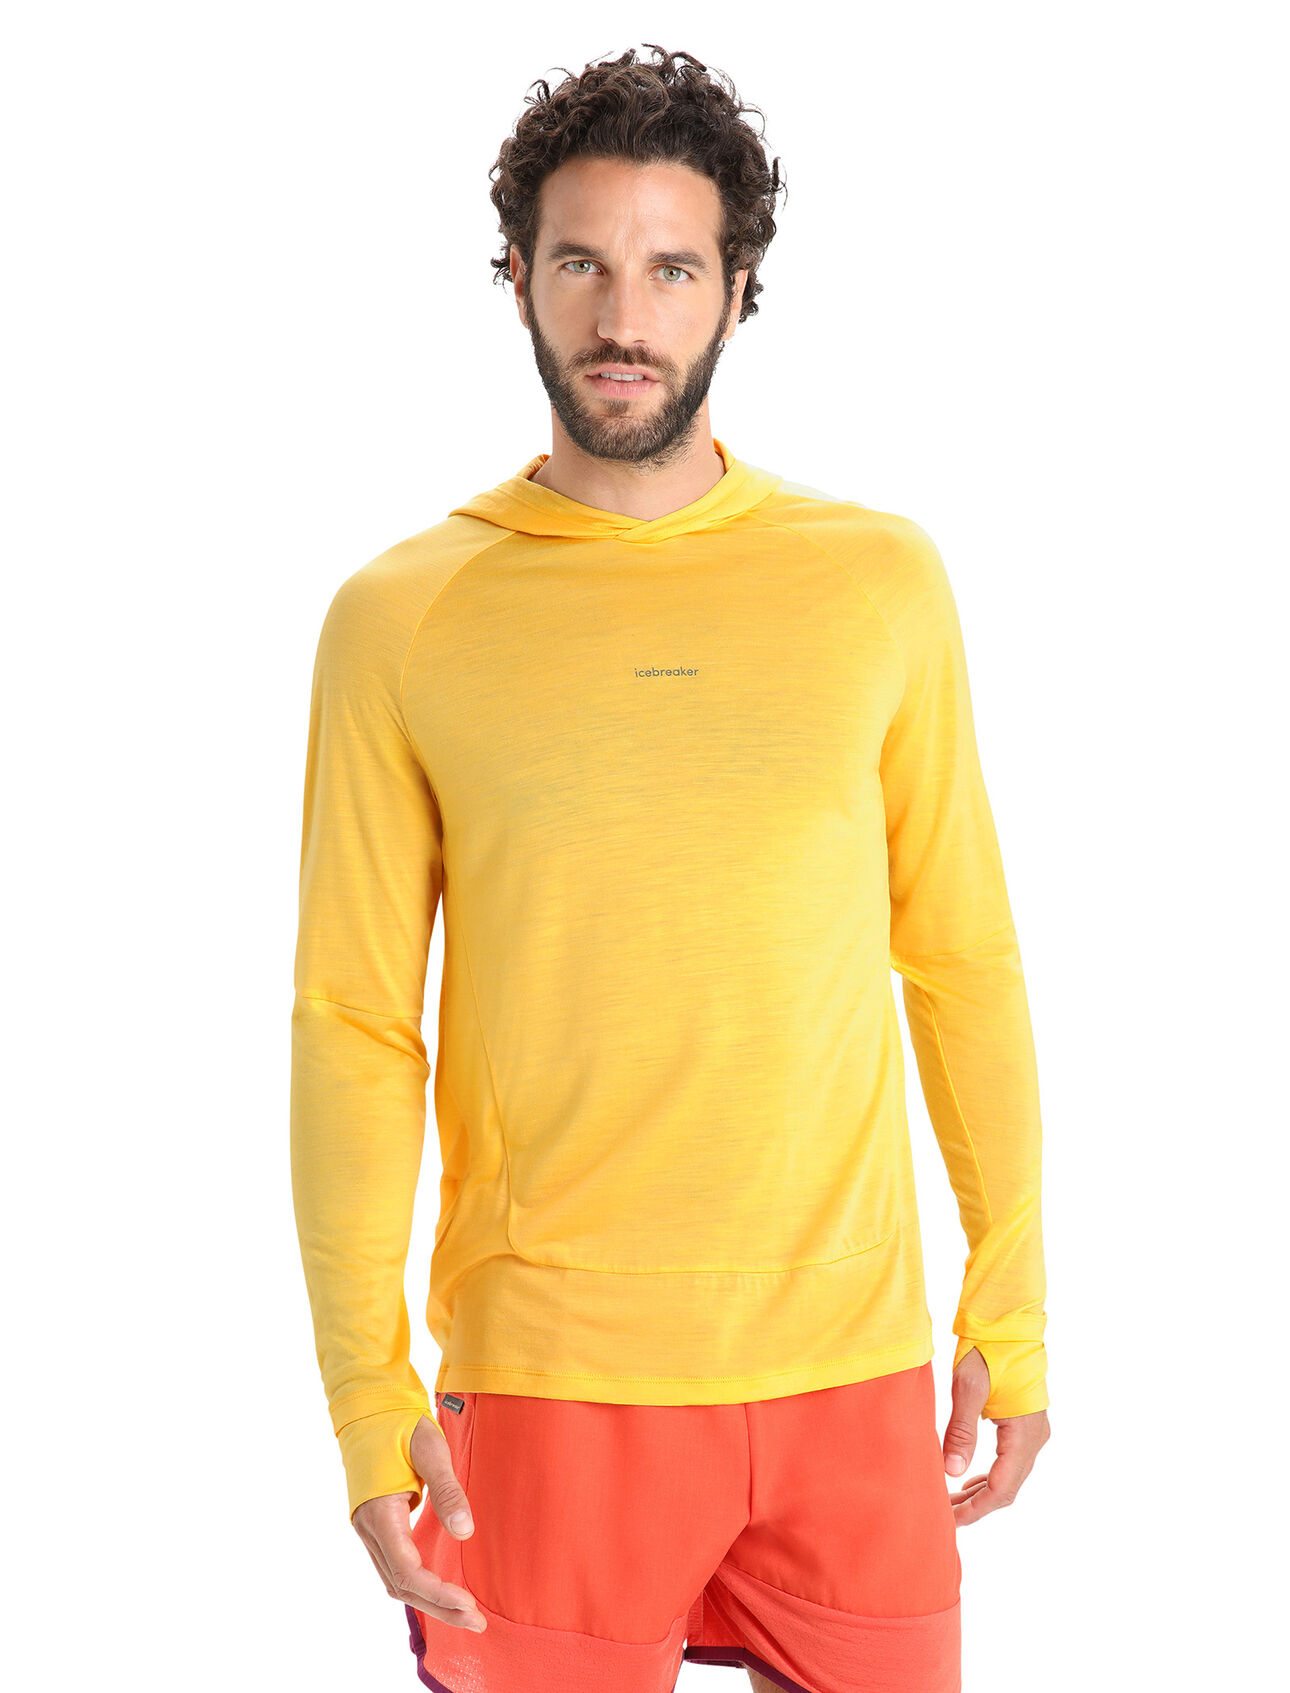 Mens 125 Cool-Lite™ Sphere Merino Long Sleeve Hoodie A lightweight and breathable performance hoodie designed for aerobic days outside, the Cool-Lite™ Hoodie features our moisture-wicking Cool-Lite™ merino jersey fabric.